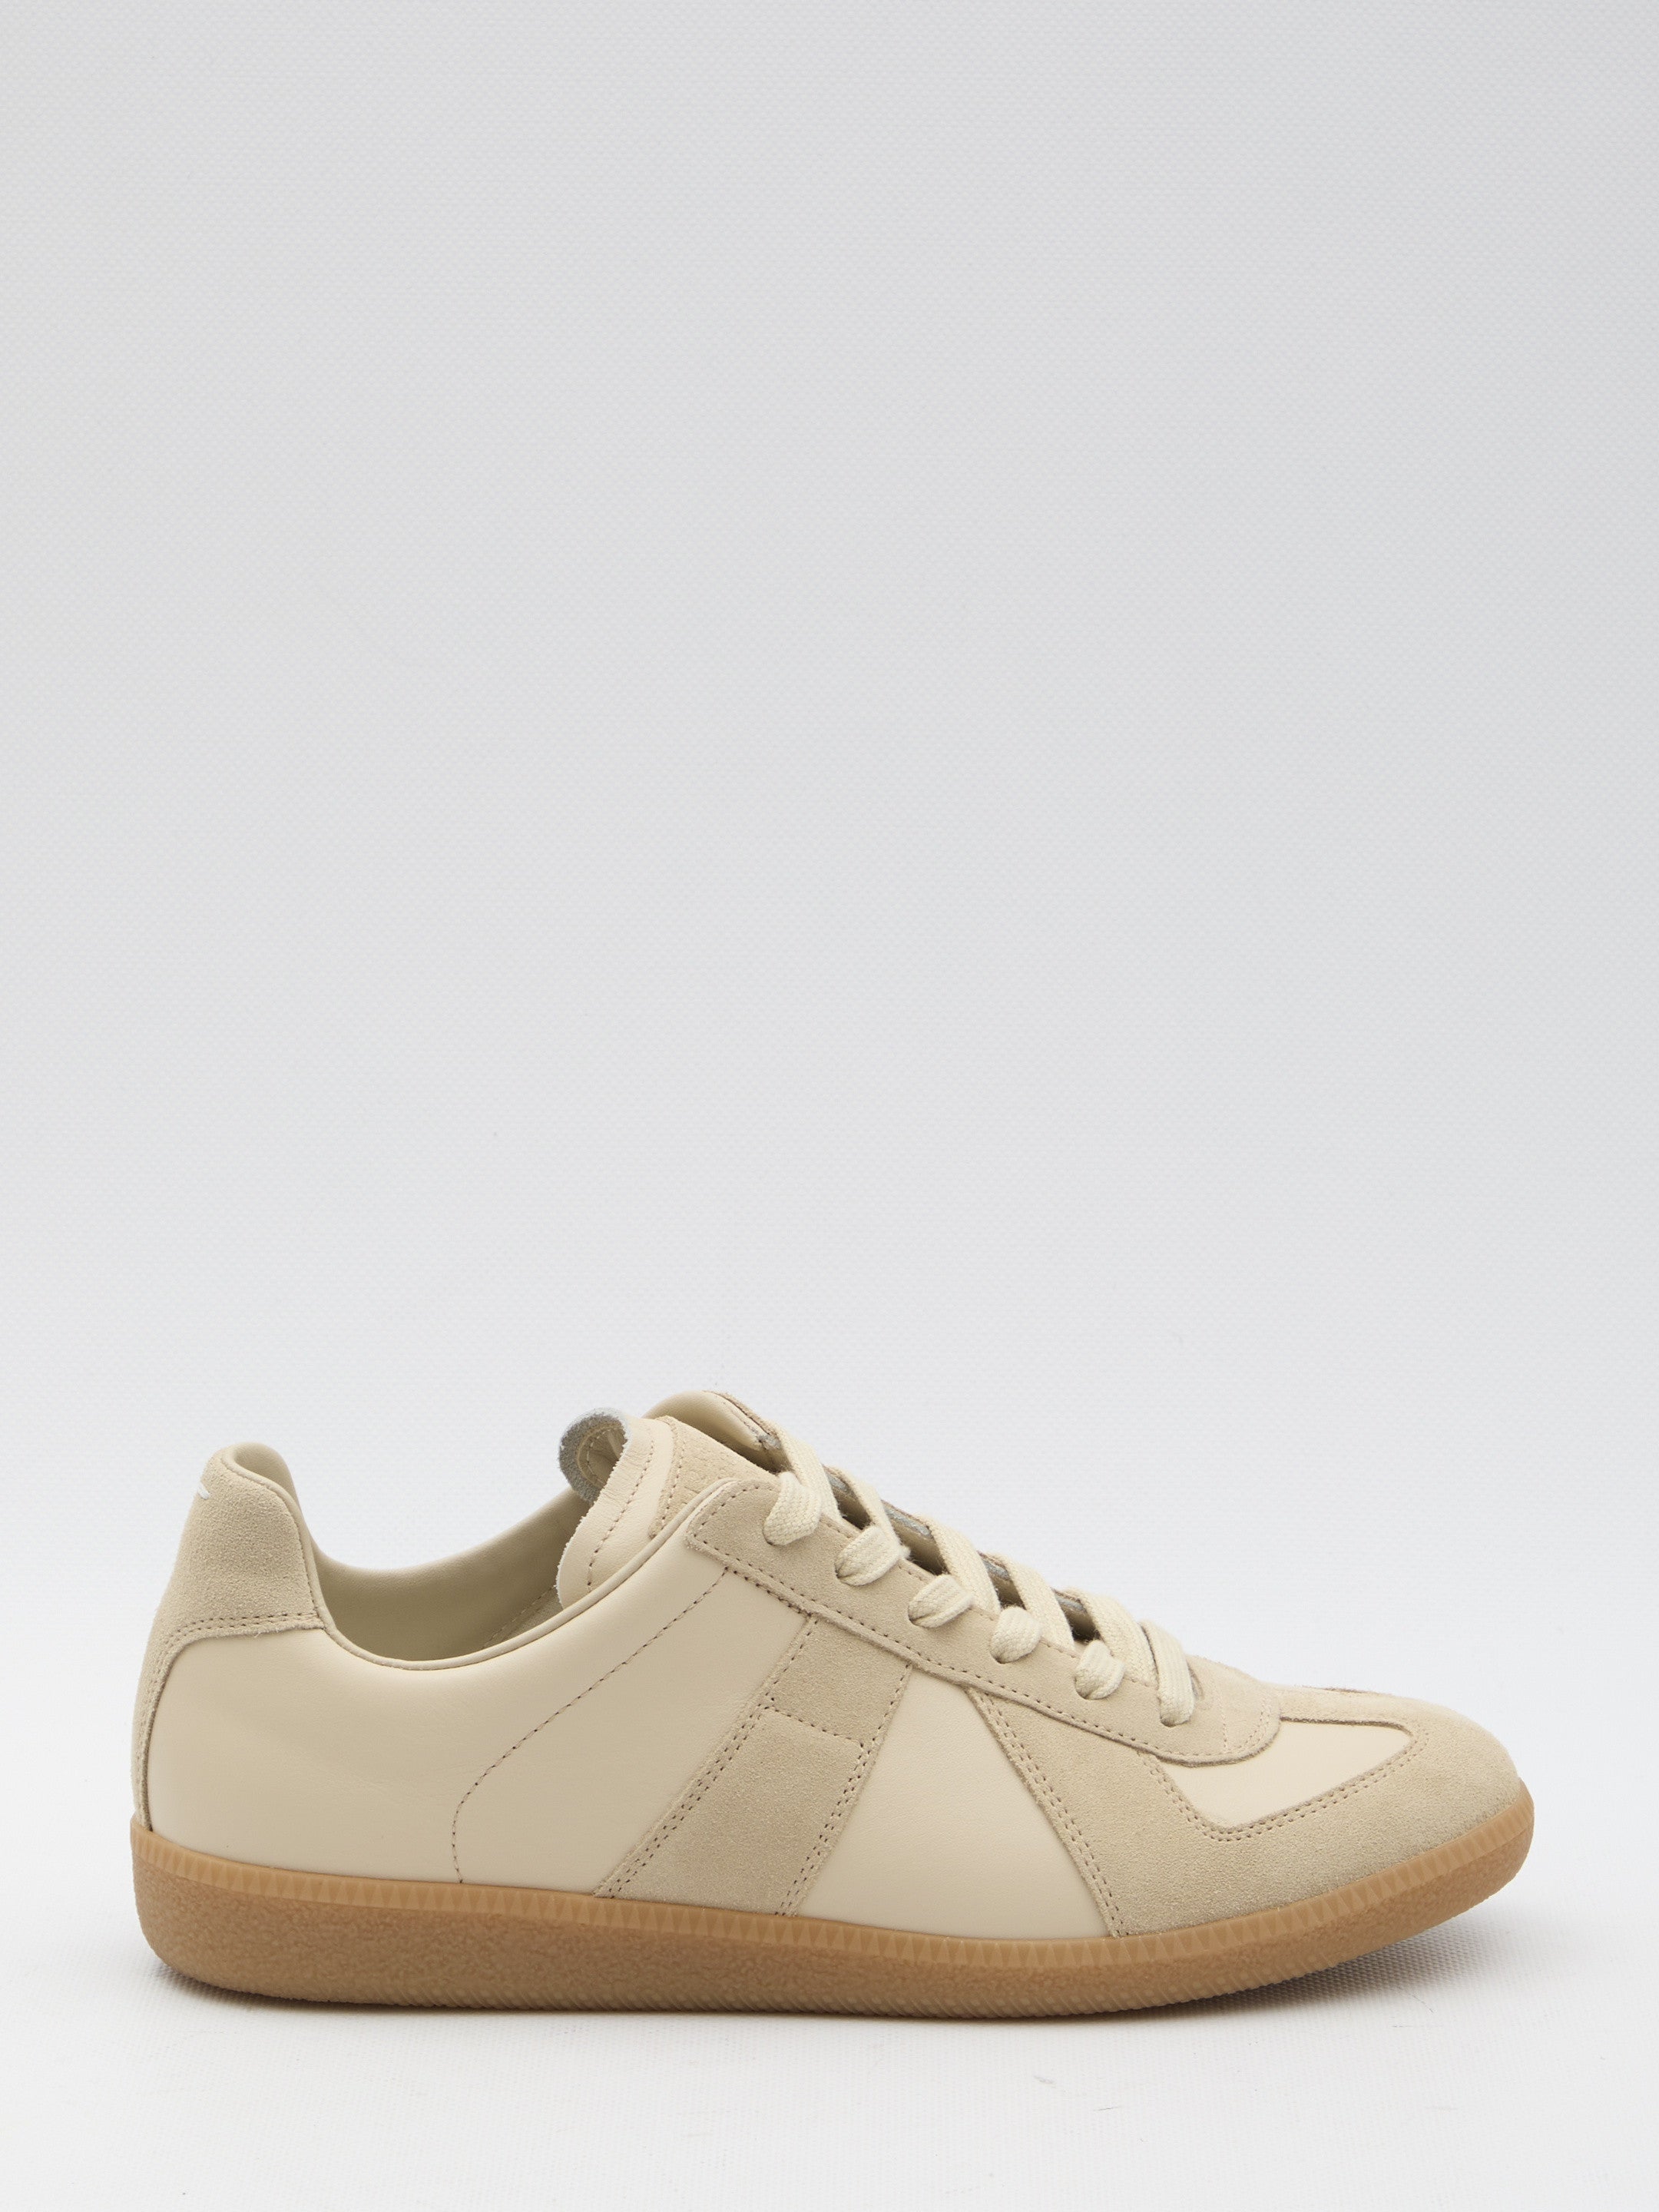 MAISON-MARGIELA-OUTLET-SALE-Replica-sneakers-Sneakers-40-BEIGE-ARCHIVE-COLLECTION.jpg